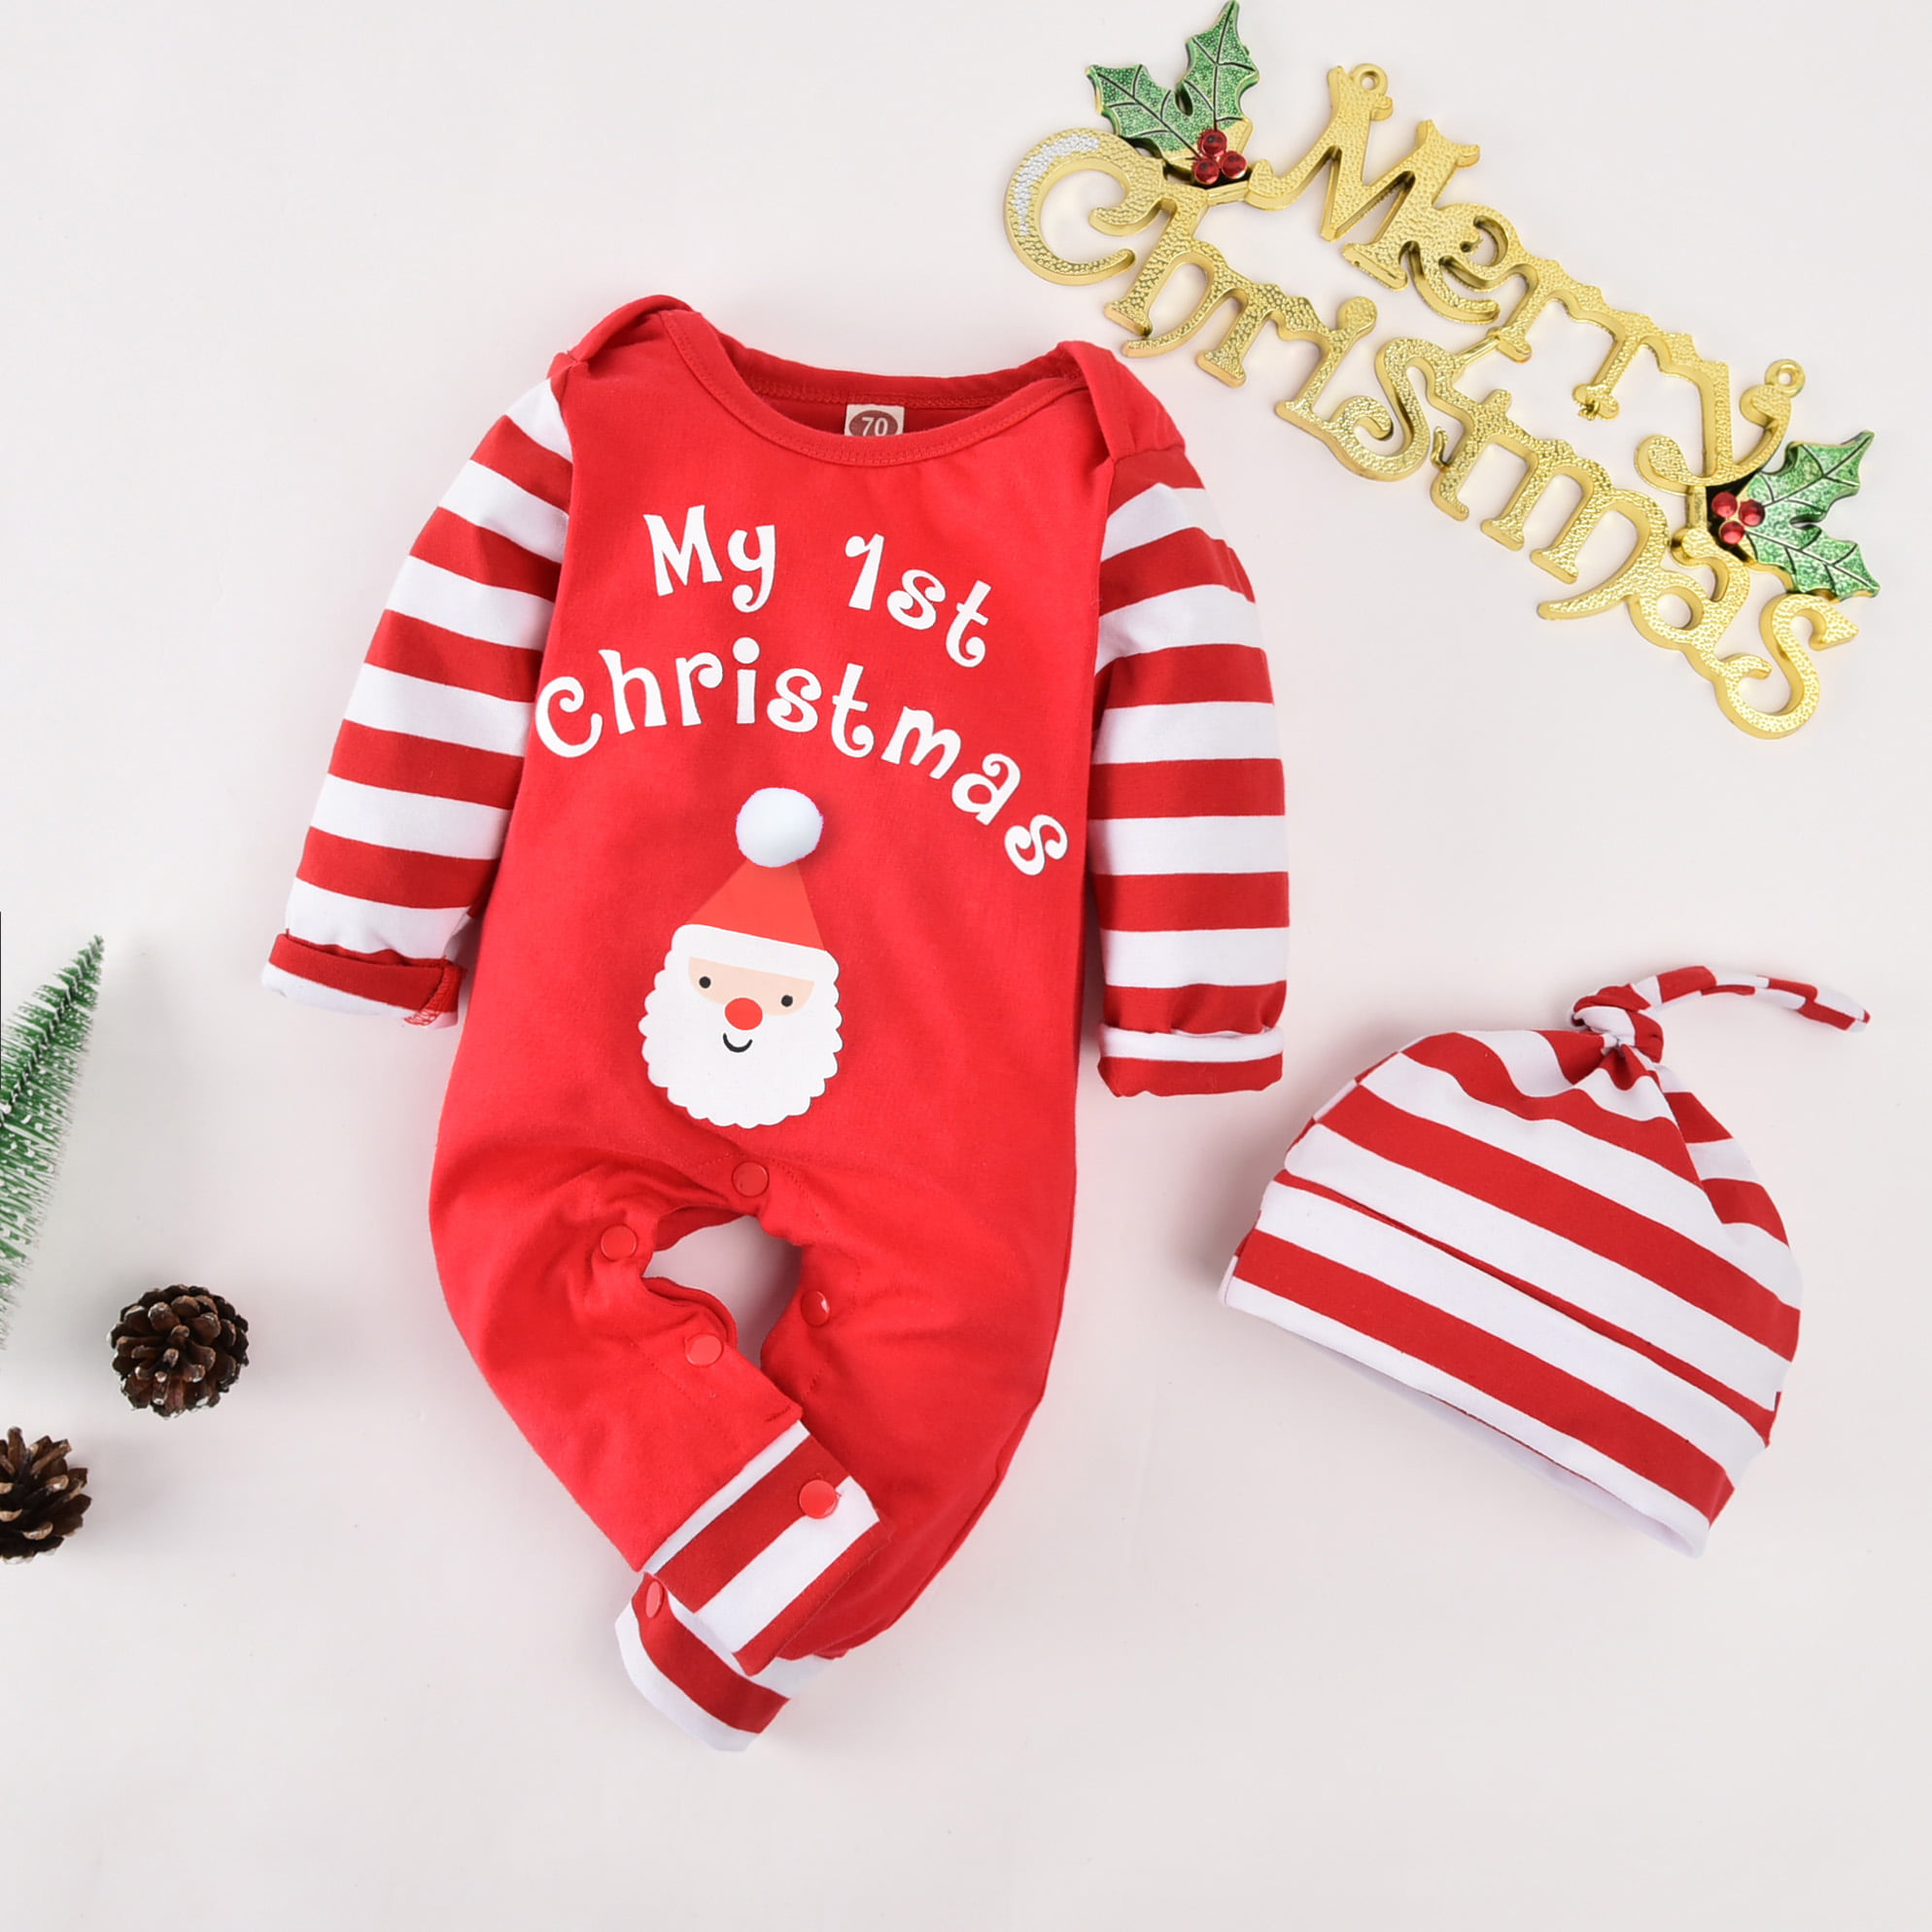 Baby First Christmas Outfit Baby Santa Outfit Kleding Unisex kinderkleding Unisex babykleding Kledingsets First Christmas Outfit Baby Christmas Outfit Christmas Baby Outfit Baby Santa Hat 